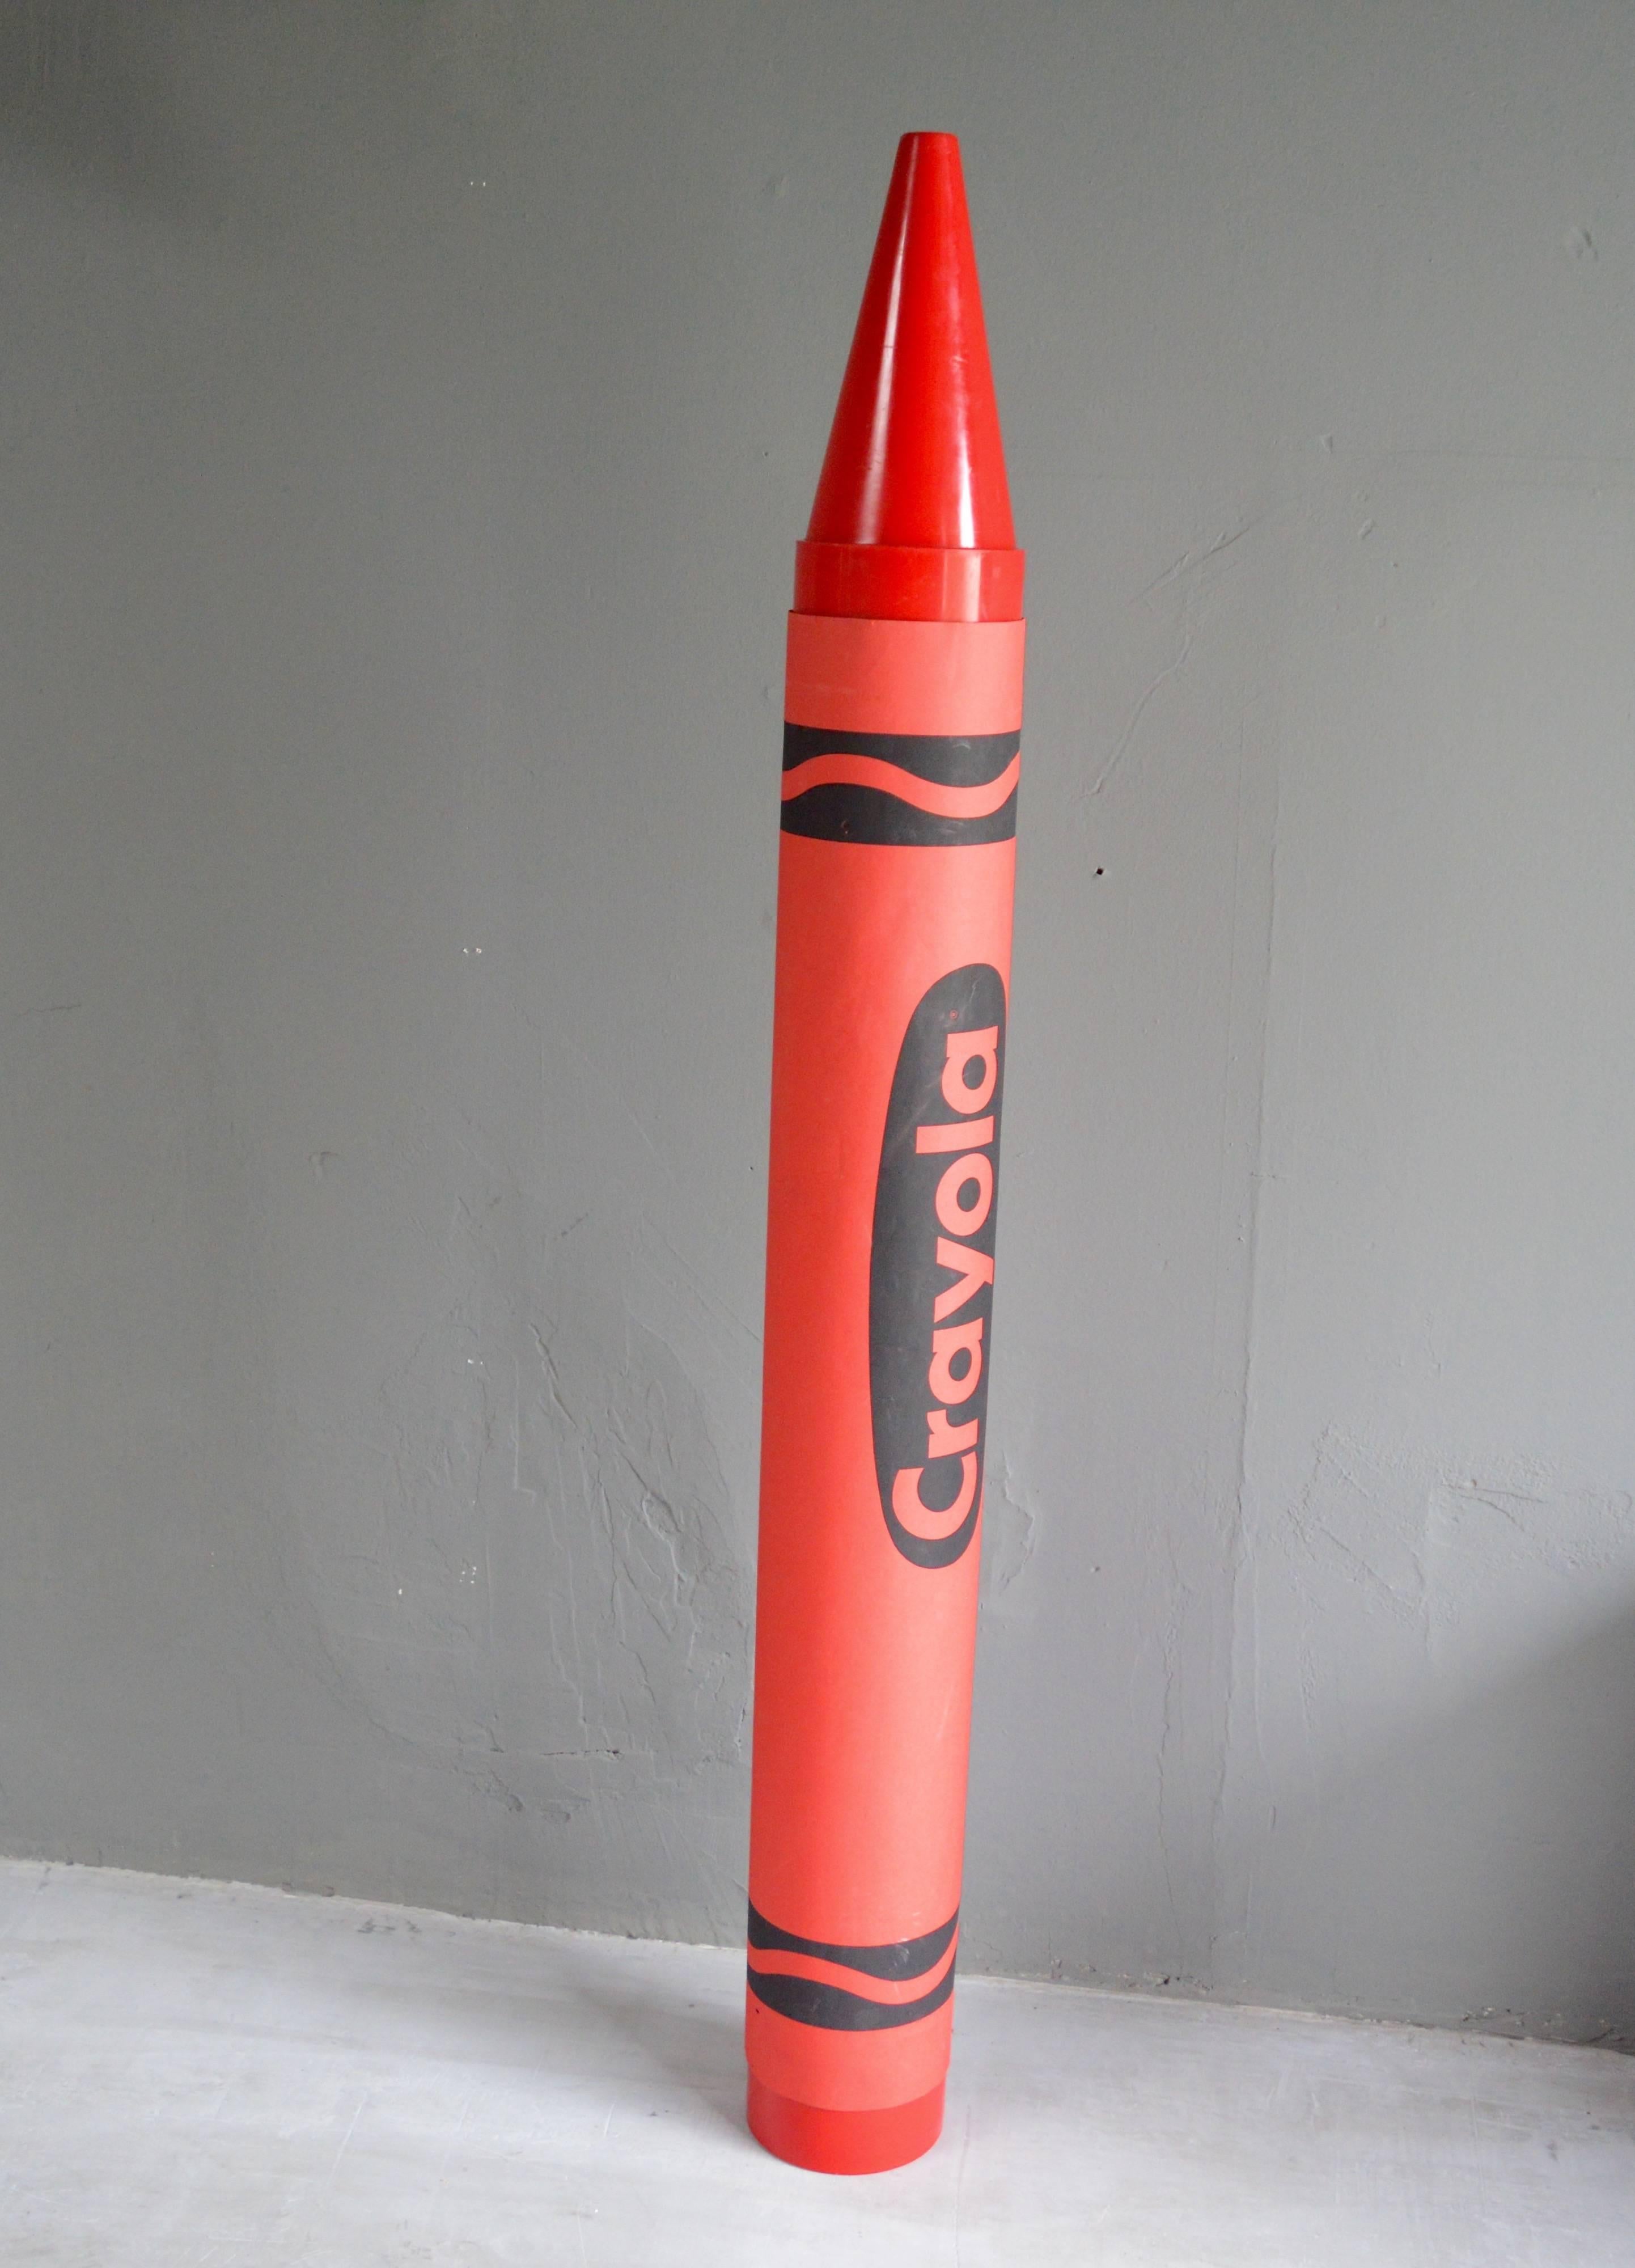 Fantastic red Crayola crayon. Heavy plastic frame with thick paper label. Made by Think Big!. This is a rare vintage piece. Excellent vintage condition. Great pop art!

Blue crayon available in separate listing.